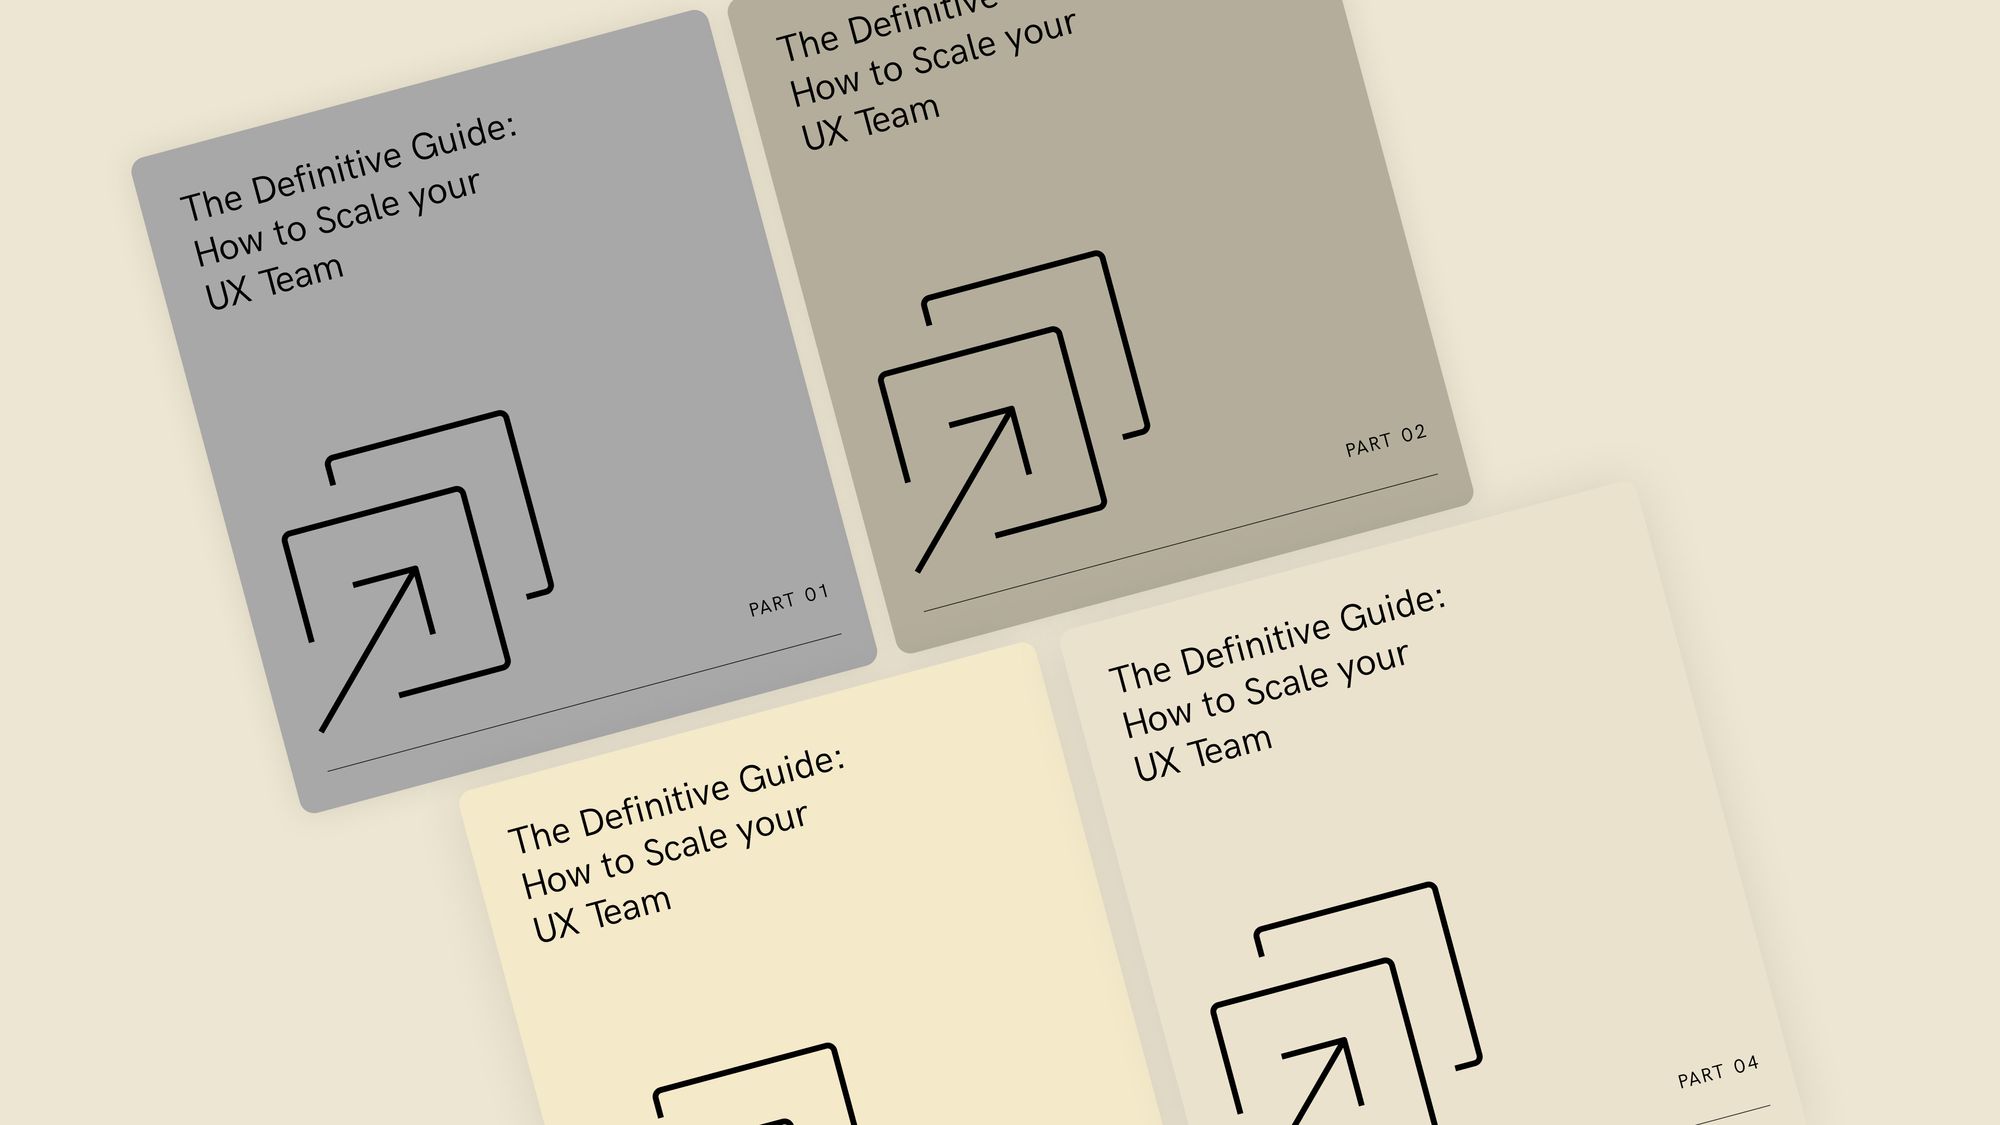 An Image of a collection of guidebook cover's with an icon representing scaling